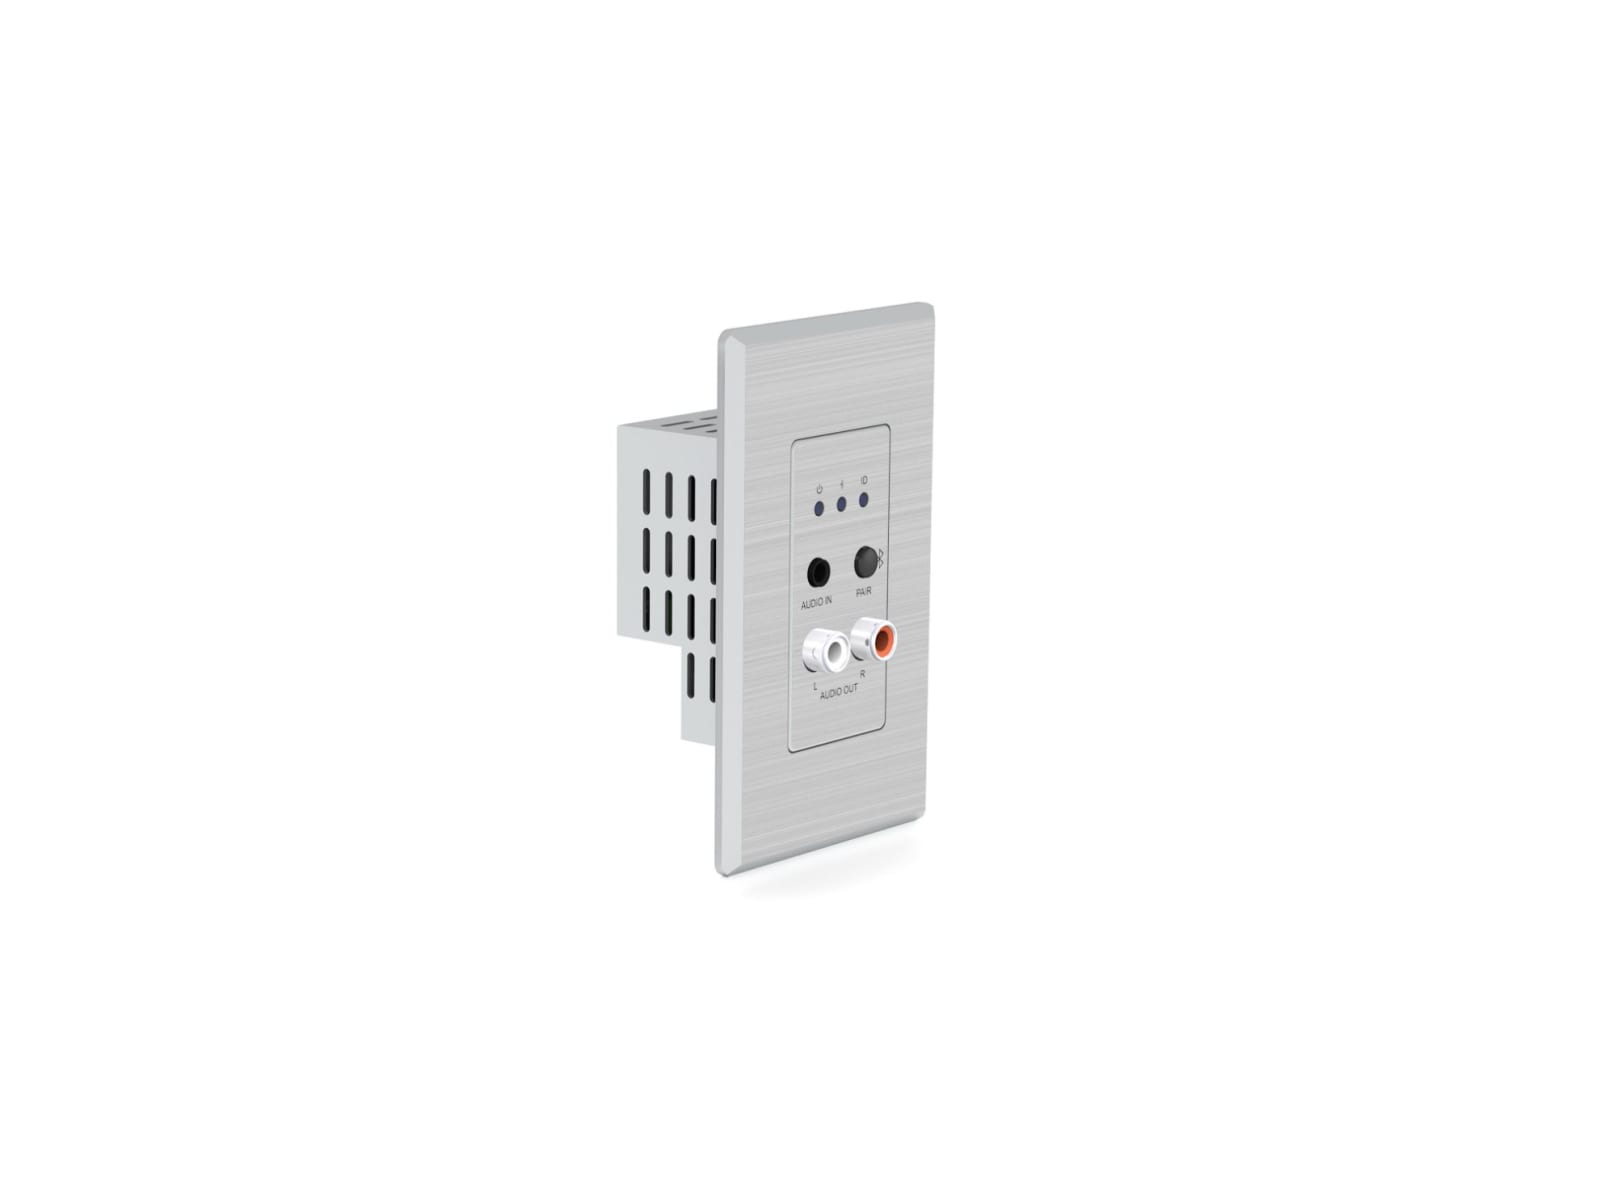 WP-301xl Active Wall Plate — Computer Graphics Video & Stereo Audio  Transmitter